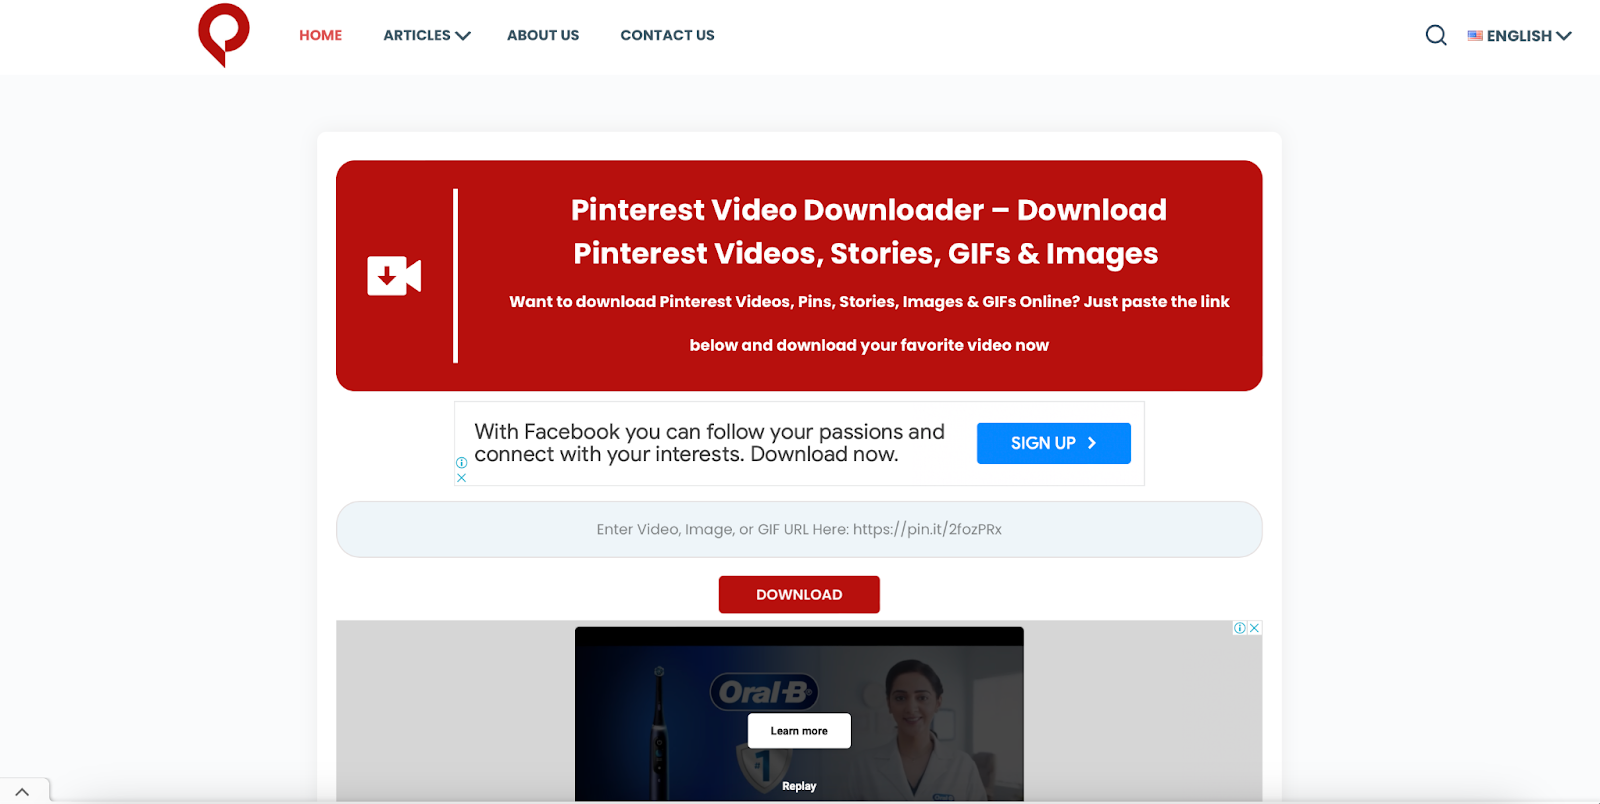 A Guide to Pinterest Video Downloader: A Tool to Help You Download Videos from Pinterest